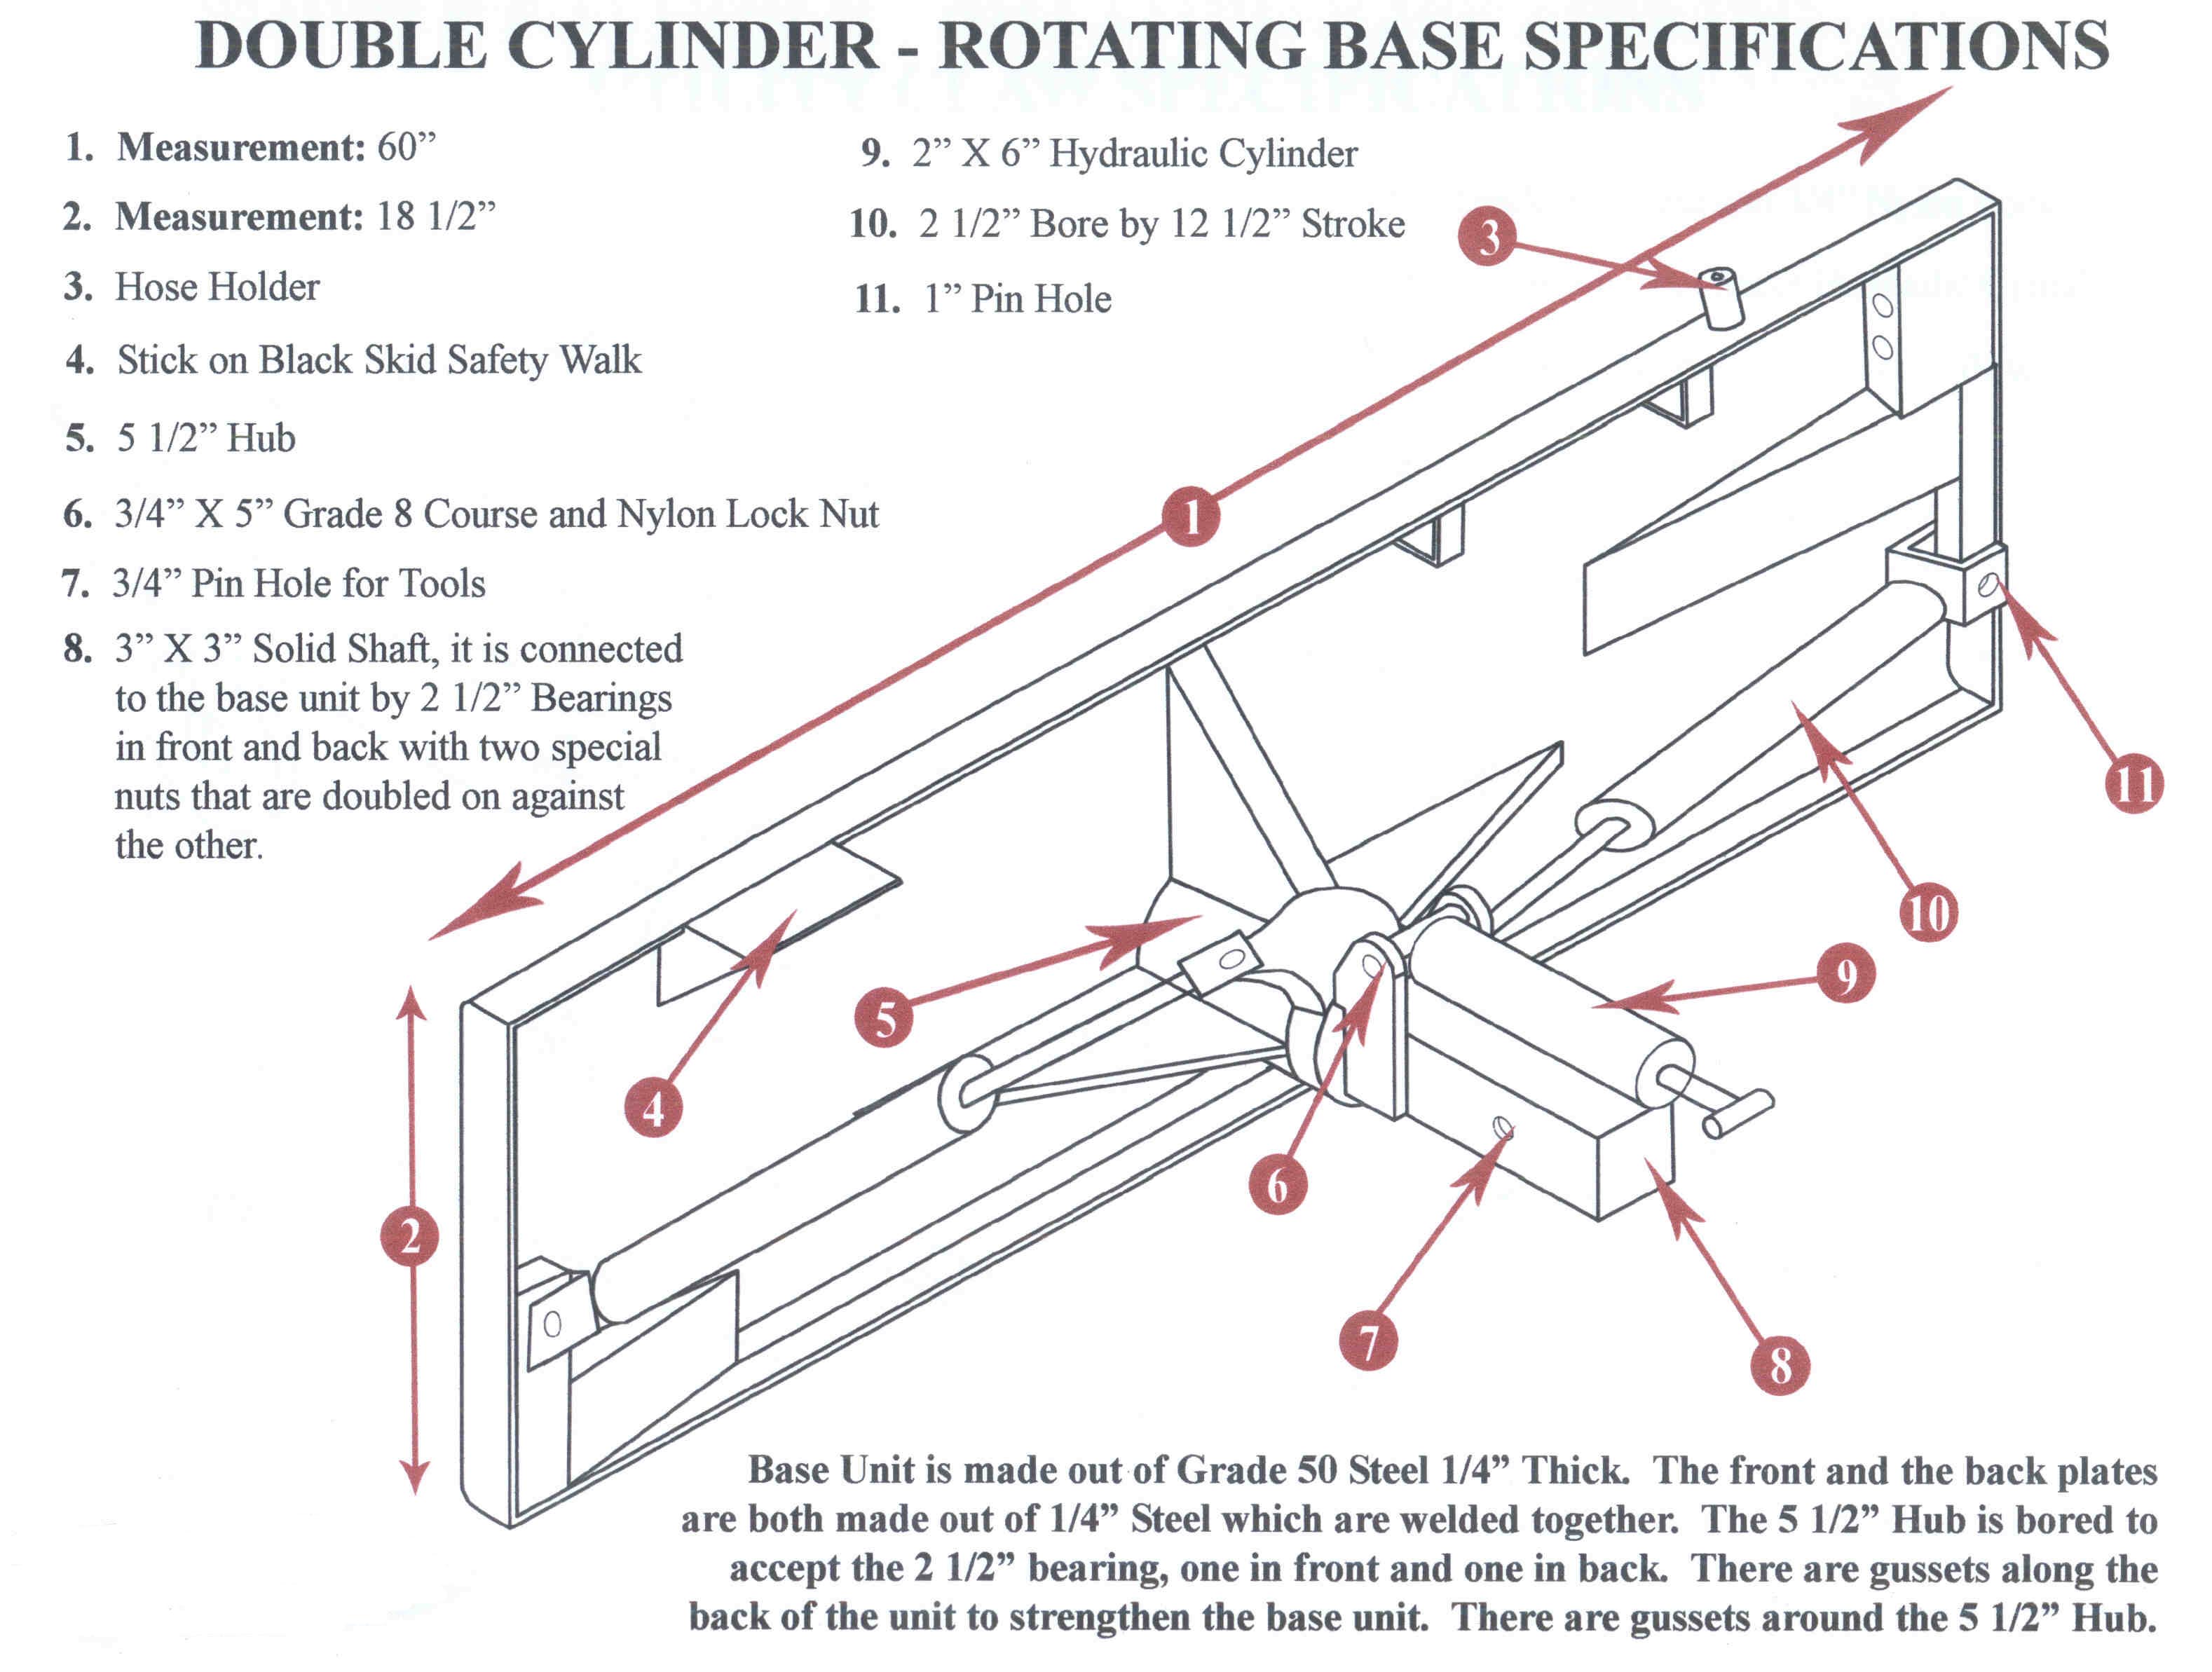 Specifications On Double Cylinder Rotating Base Plate